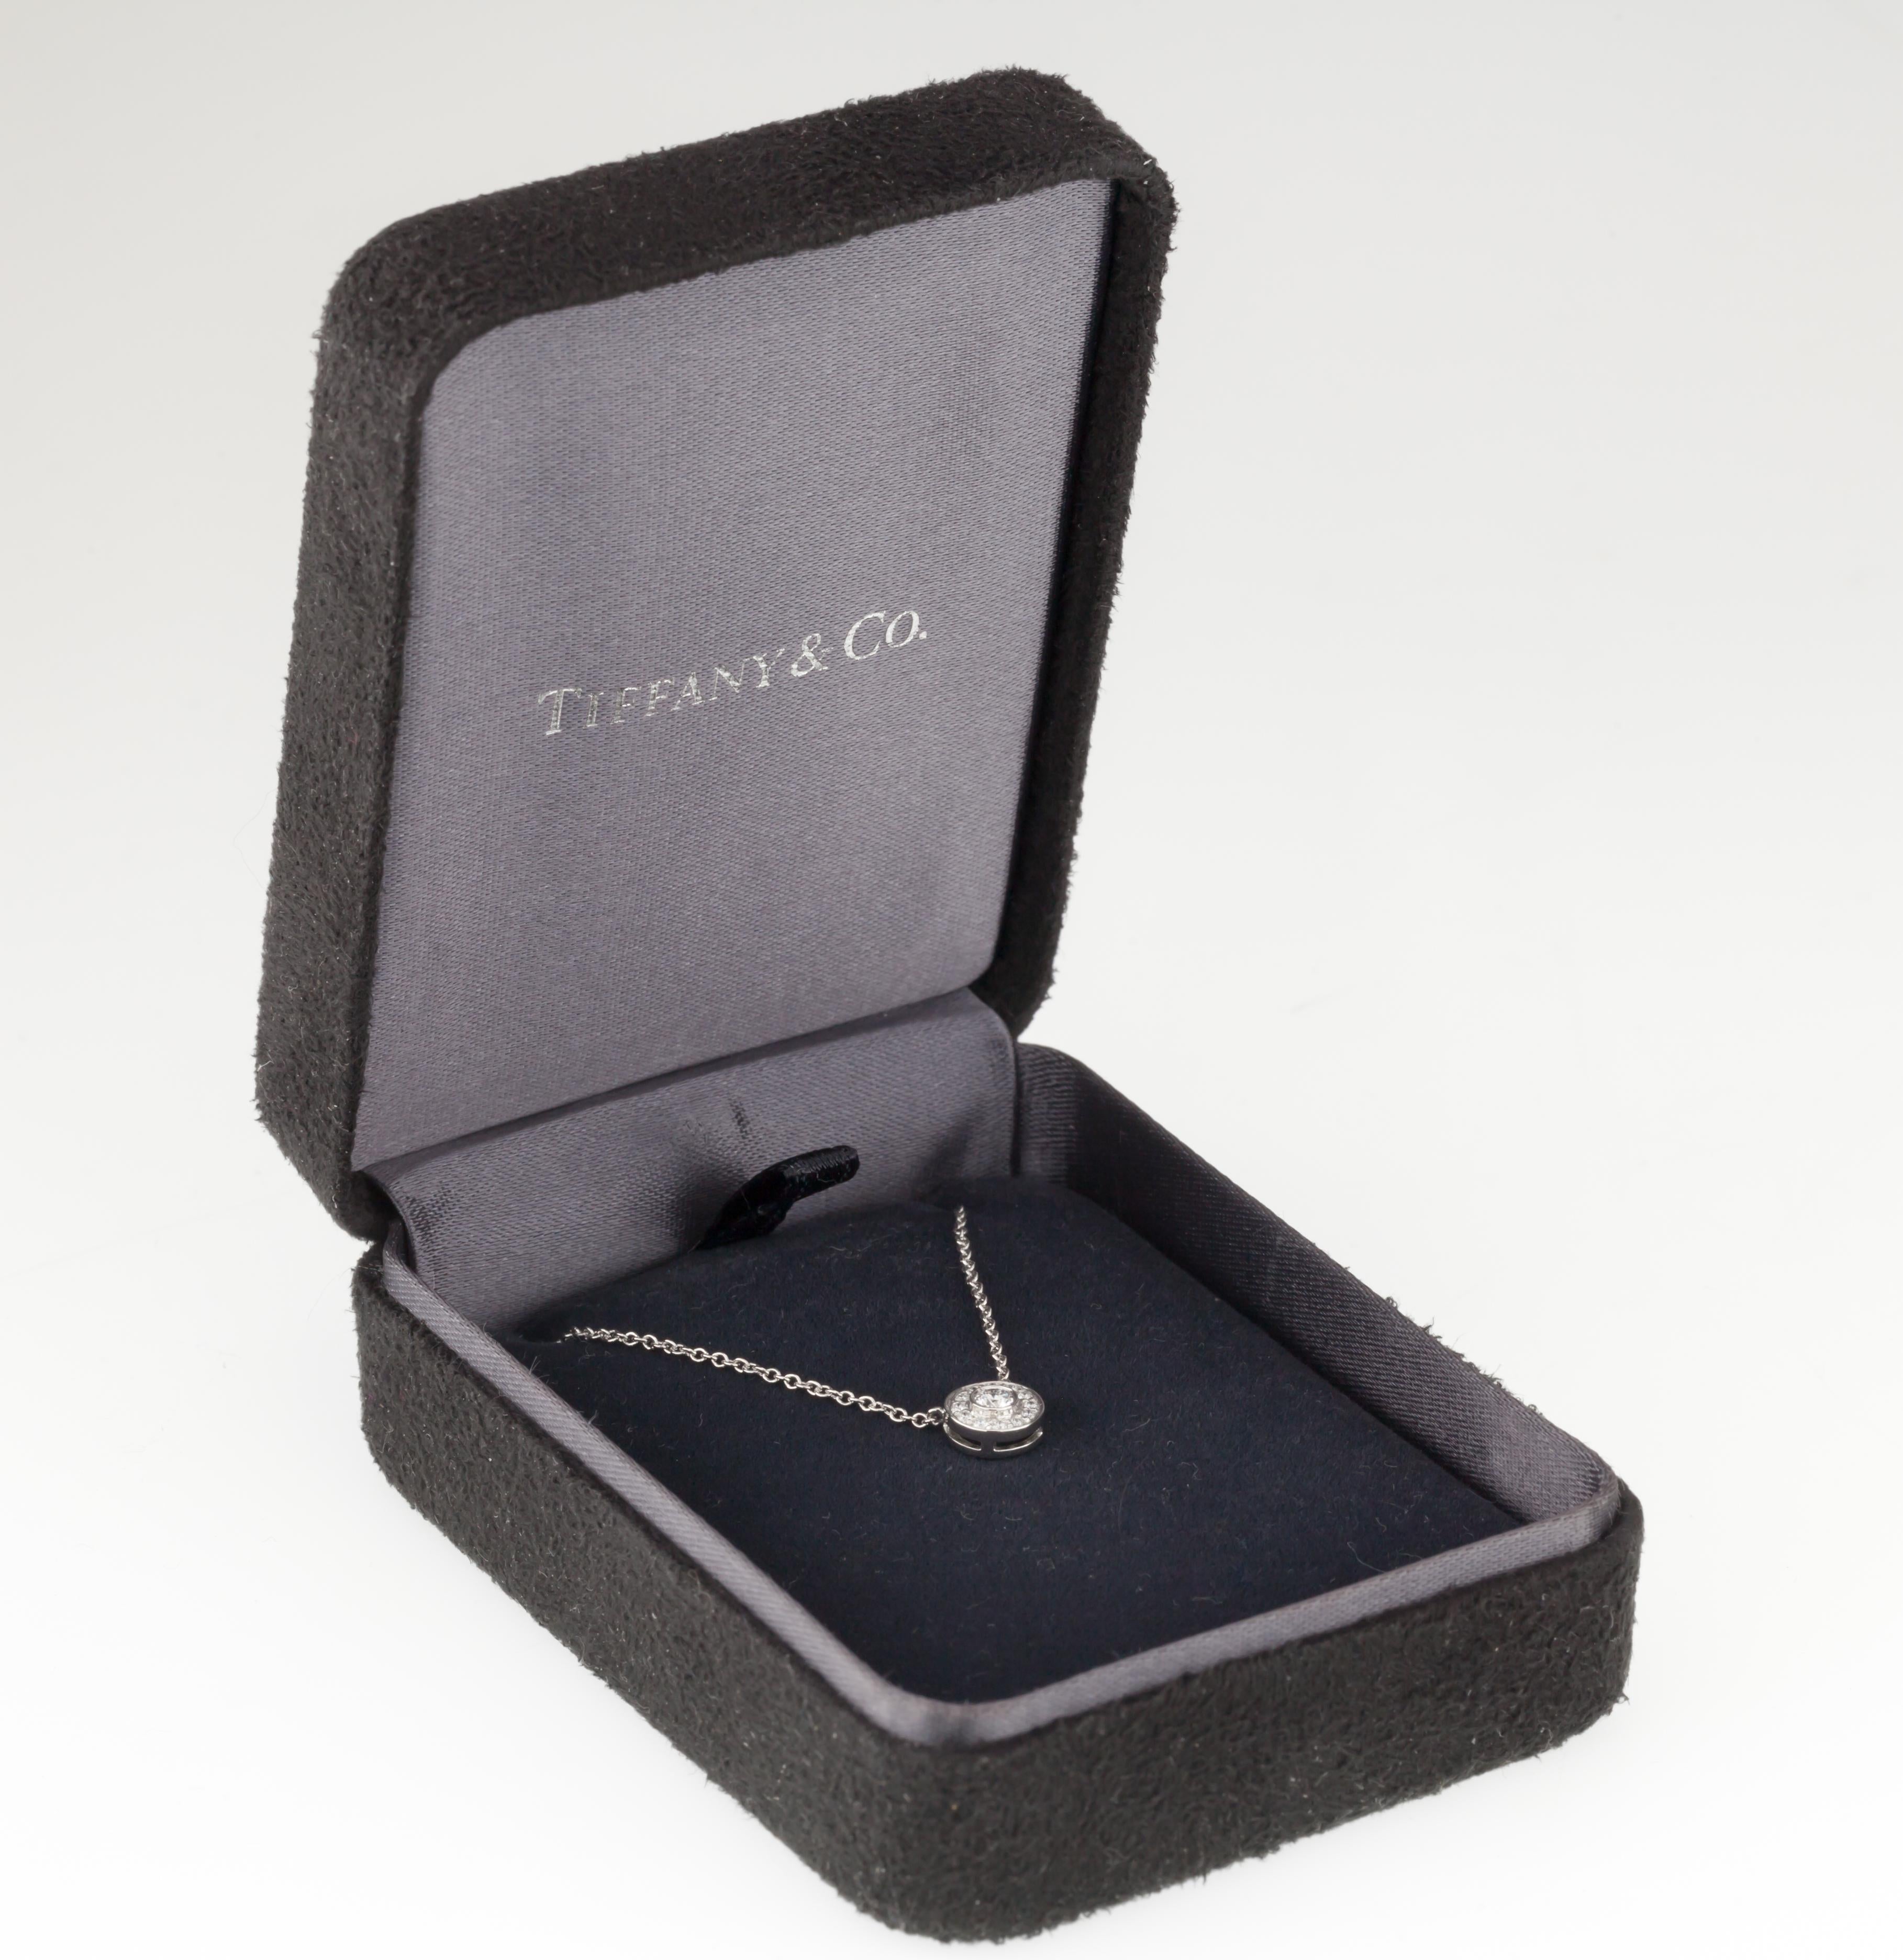 Gorgeous Tiffany & Co. Platinum Diamond Pendant
Features Round Diamond with 12 Smaller Round Diamonds in Bezel
Diameter of Pendant = Appx 7 mm
Total Mass = 2.7 grams
Total Diamond Weight = 0.12 ct
Retail Value = $1700
A Great Deal!